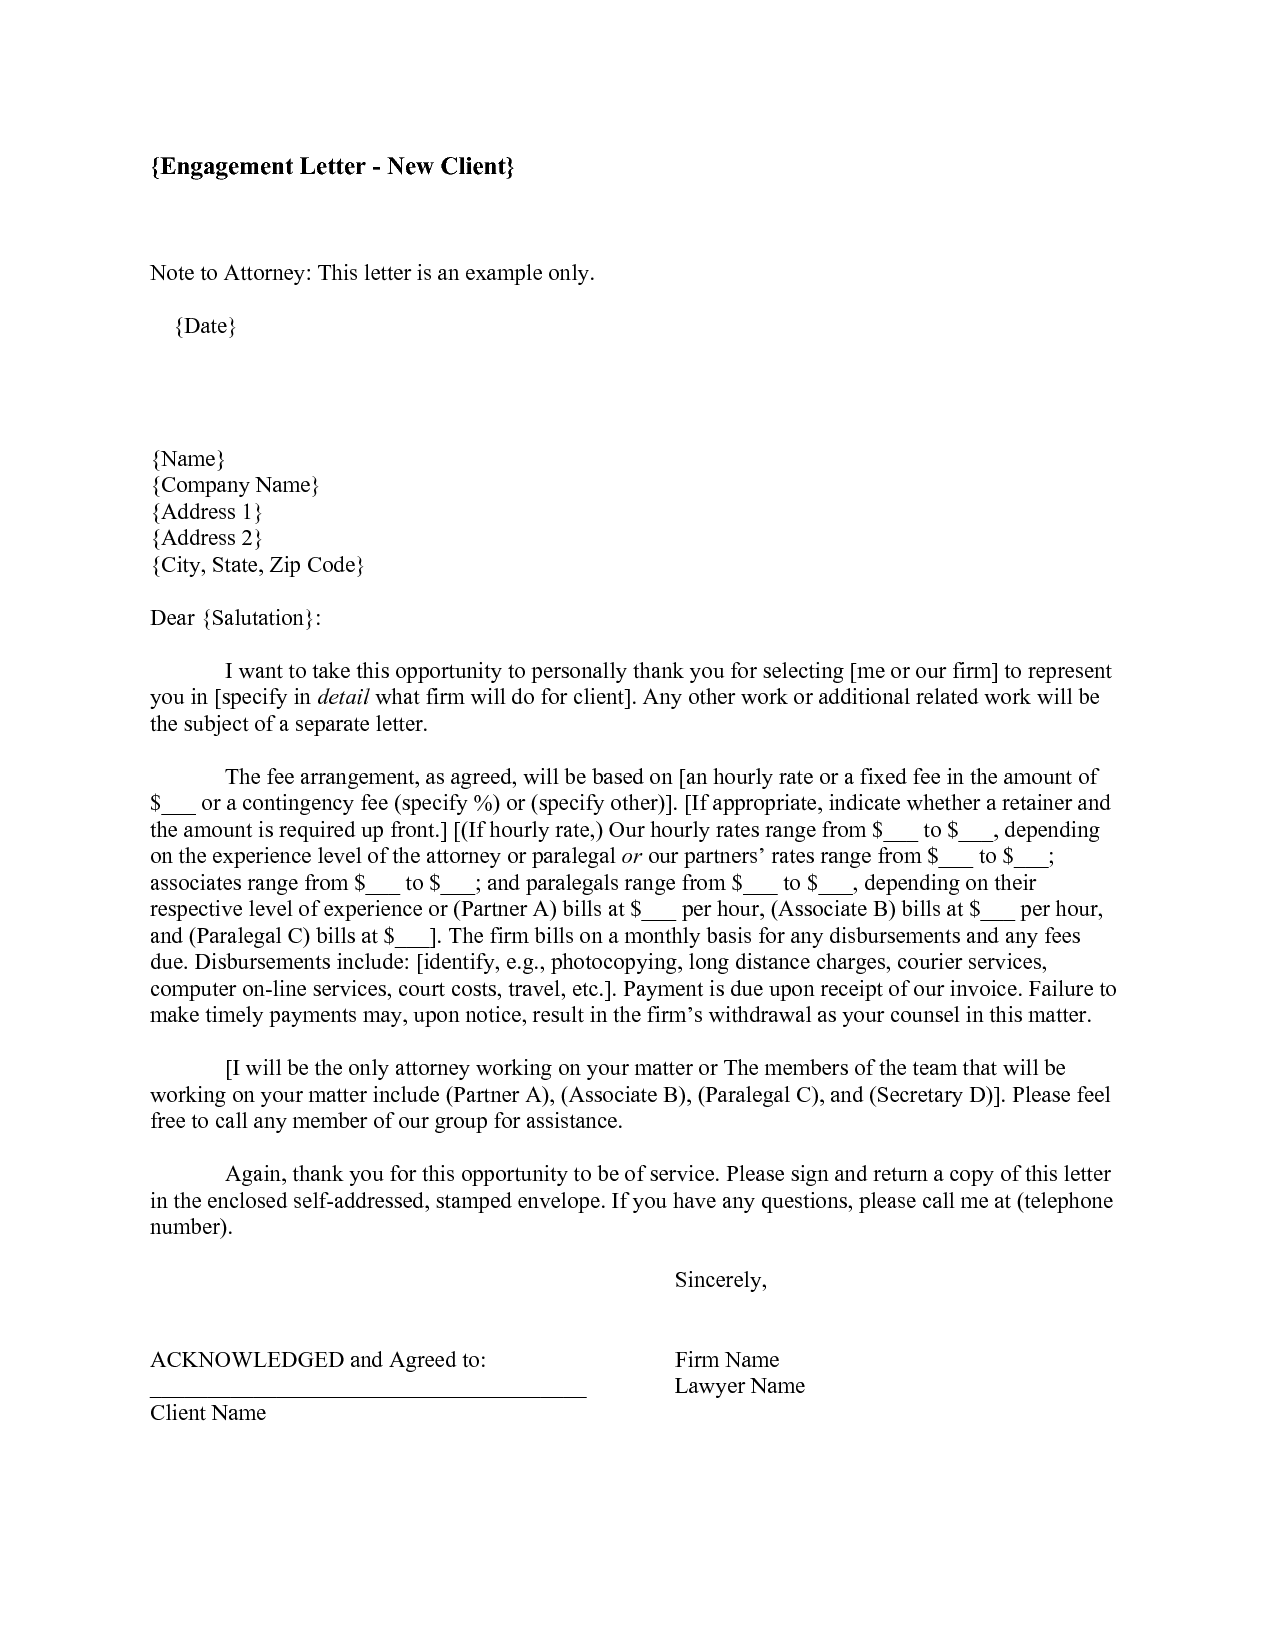 business to business introduction letter Romeo.landinez.co